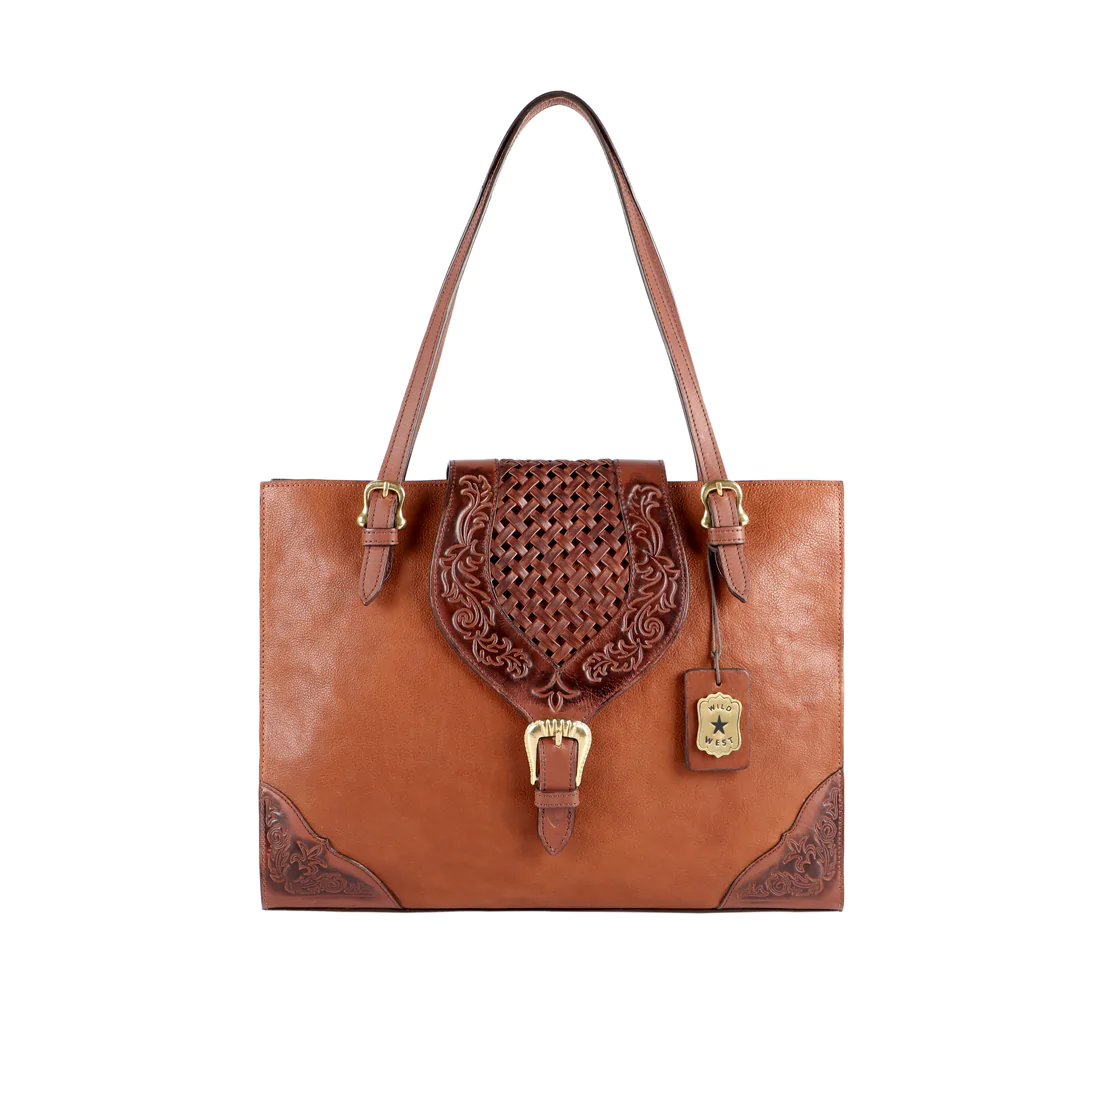 Adding Elegance with Hidesign Handbags: Stylish and Functional Accessories